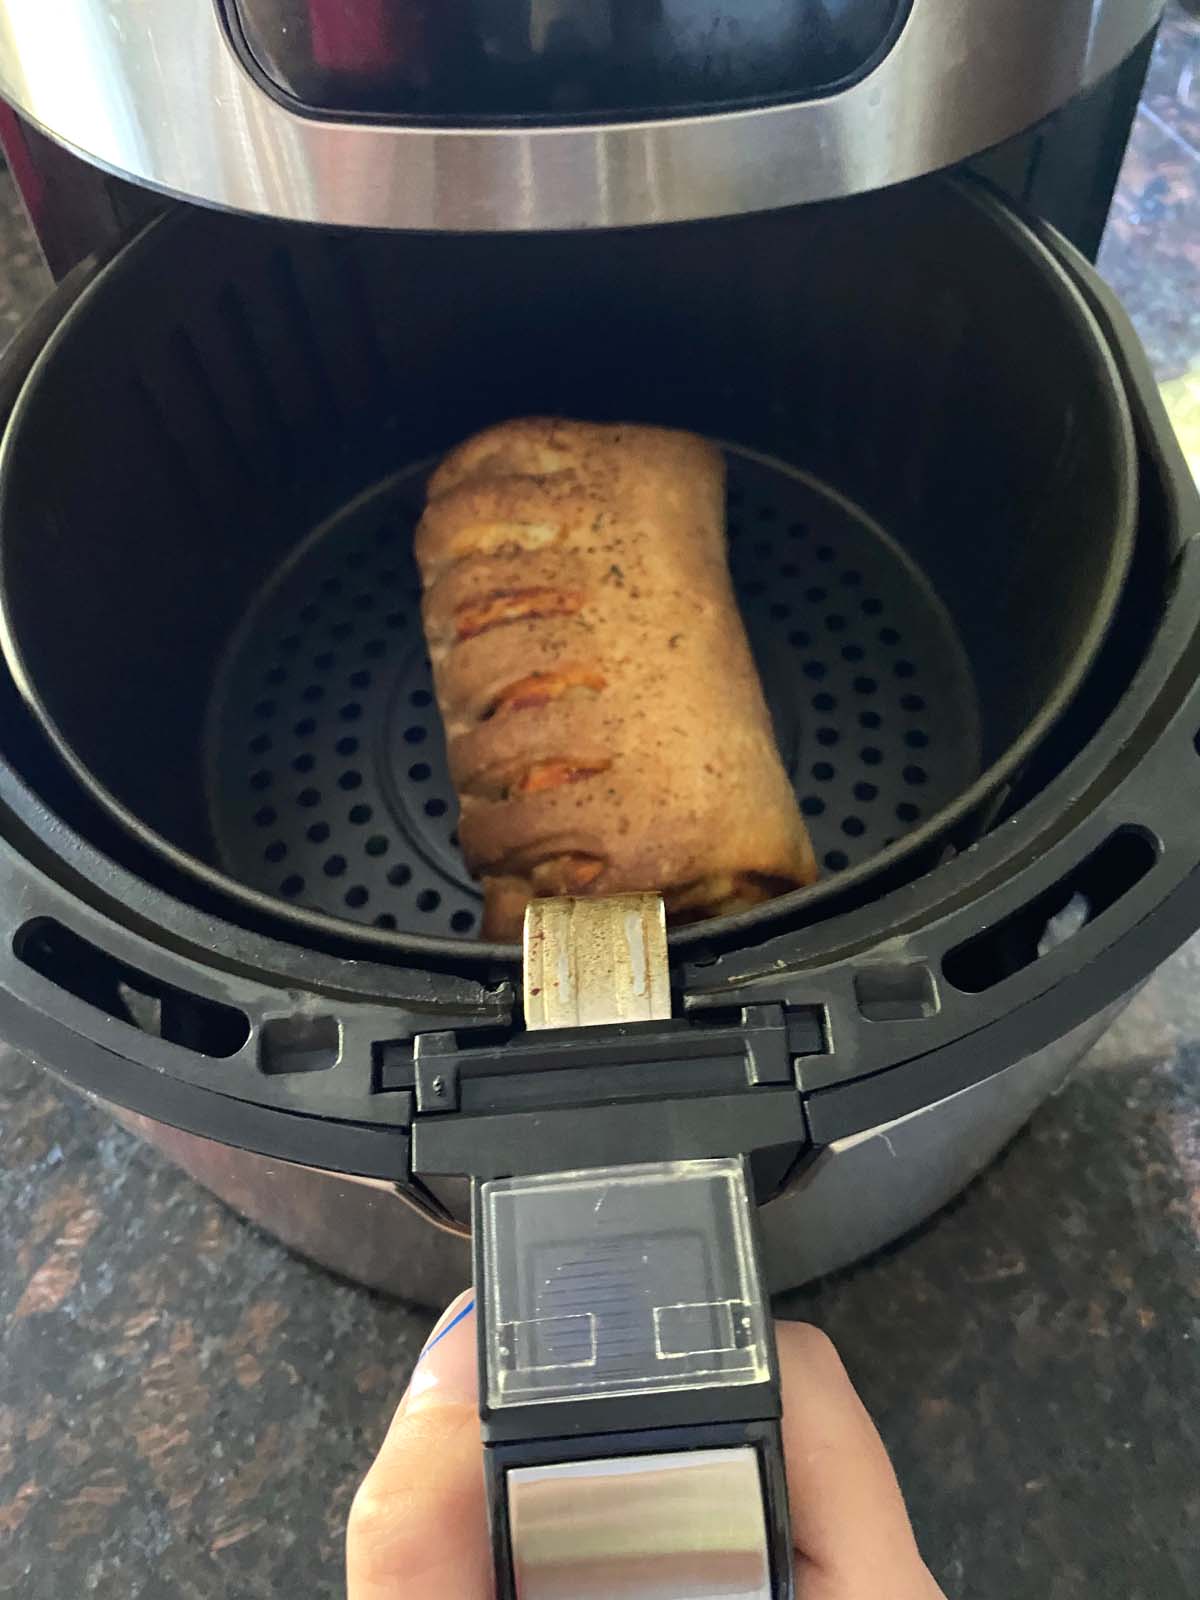 Cooked stromboli in the air fryer.